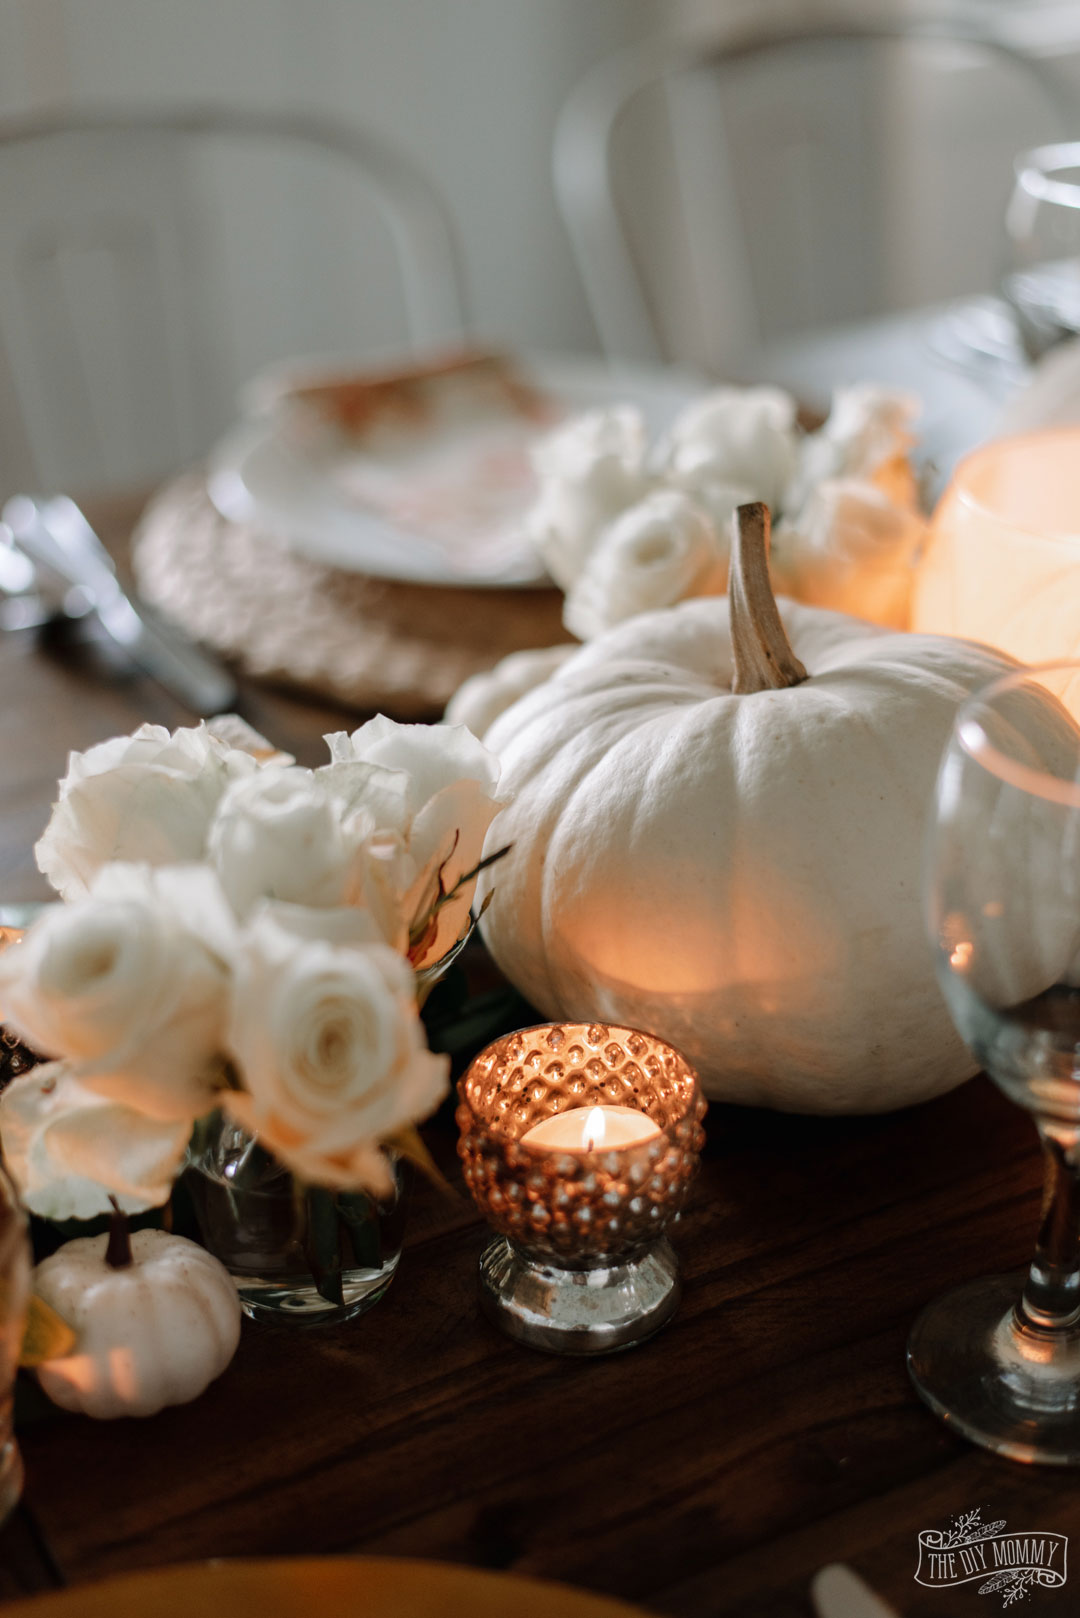 Elegant, romantic Thanksgiving tablescape idea for 12 in whites, creams and a mix and match style